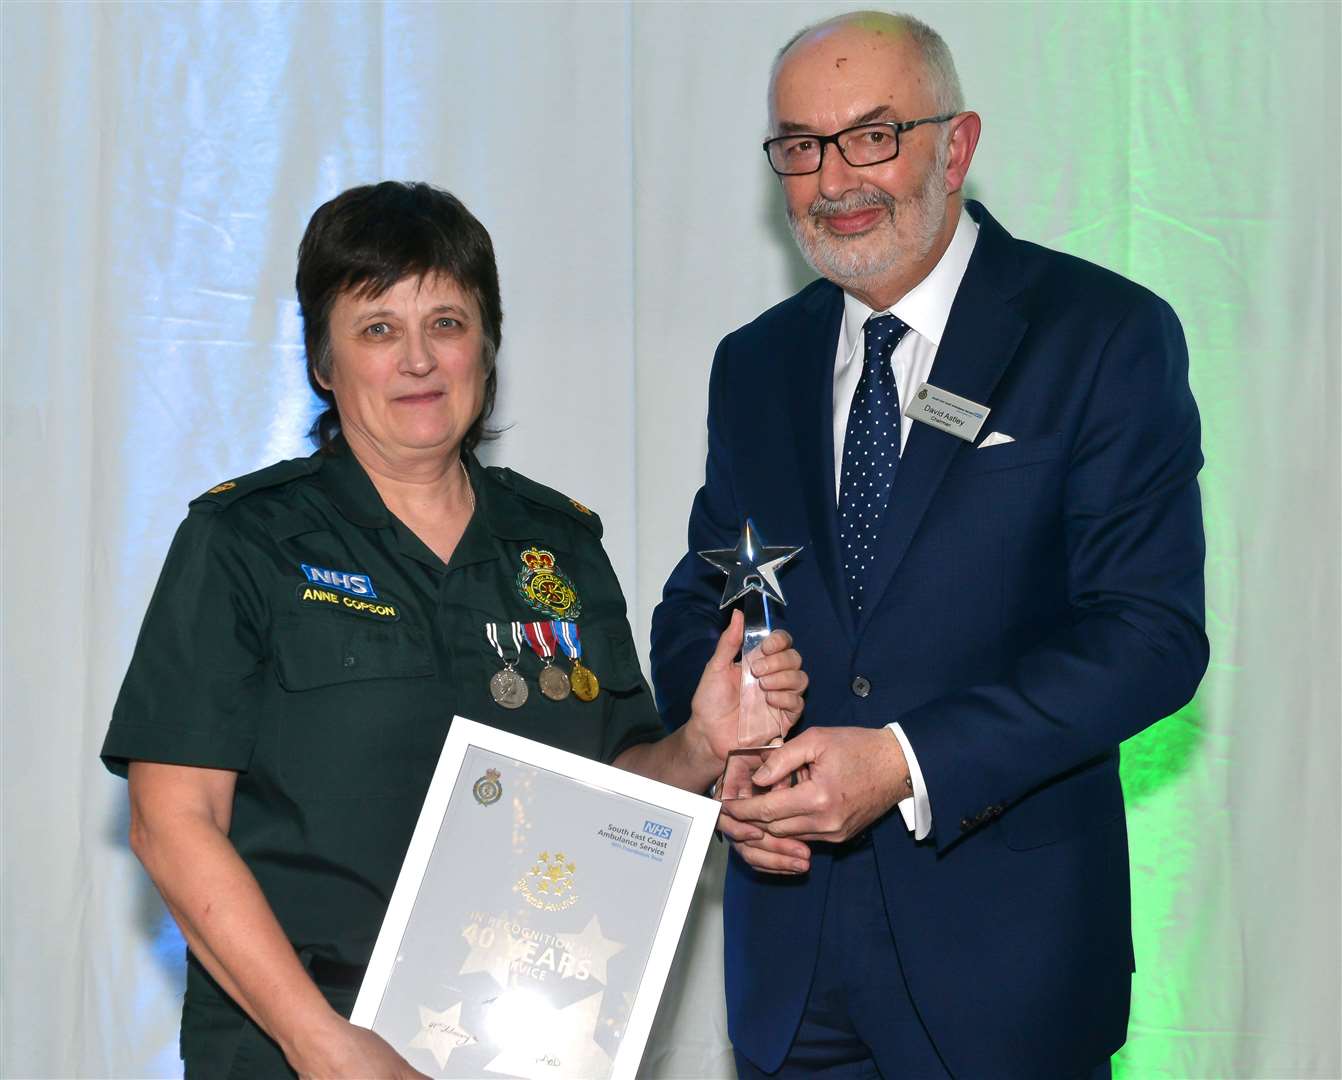 Ann Copson being handed her award for her40 years' service to ambulance service